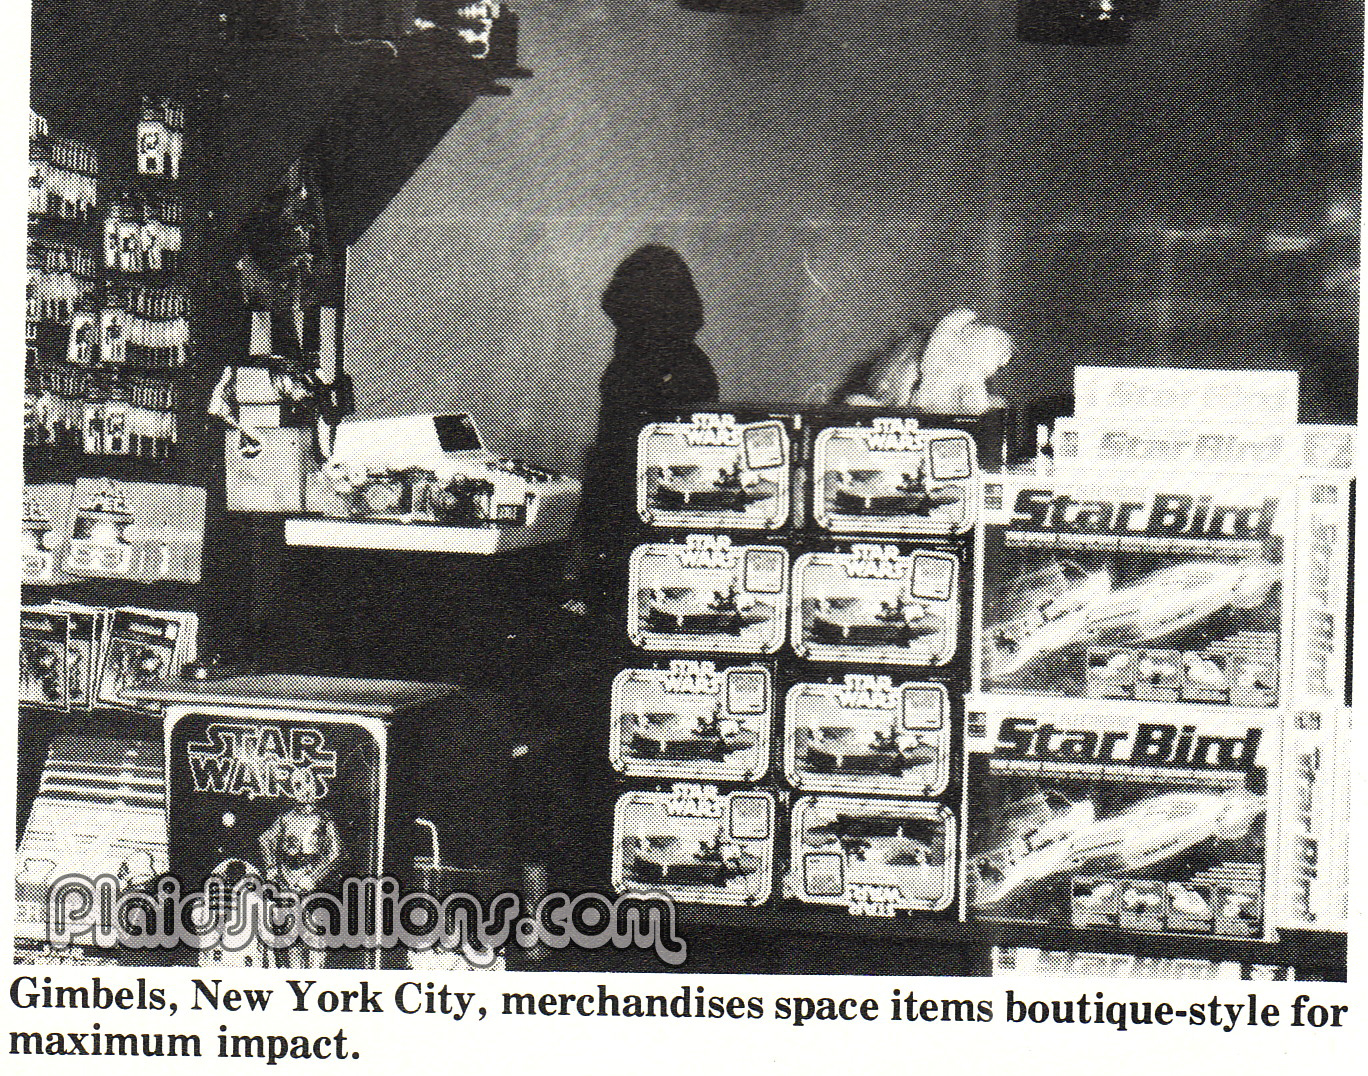 an amazing selection of kenner star wars, zymlex metal man and micronauts in 1979